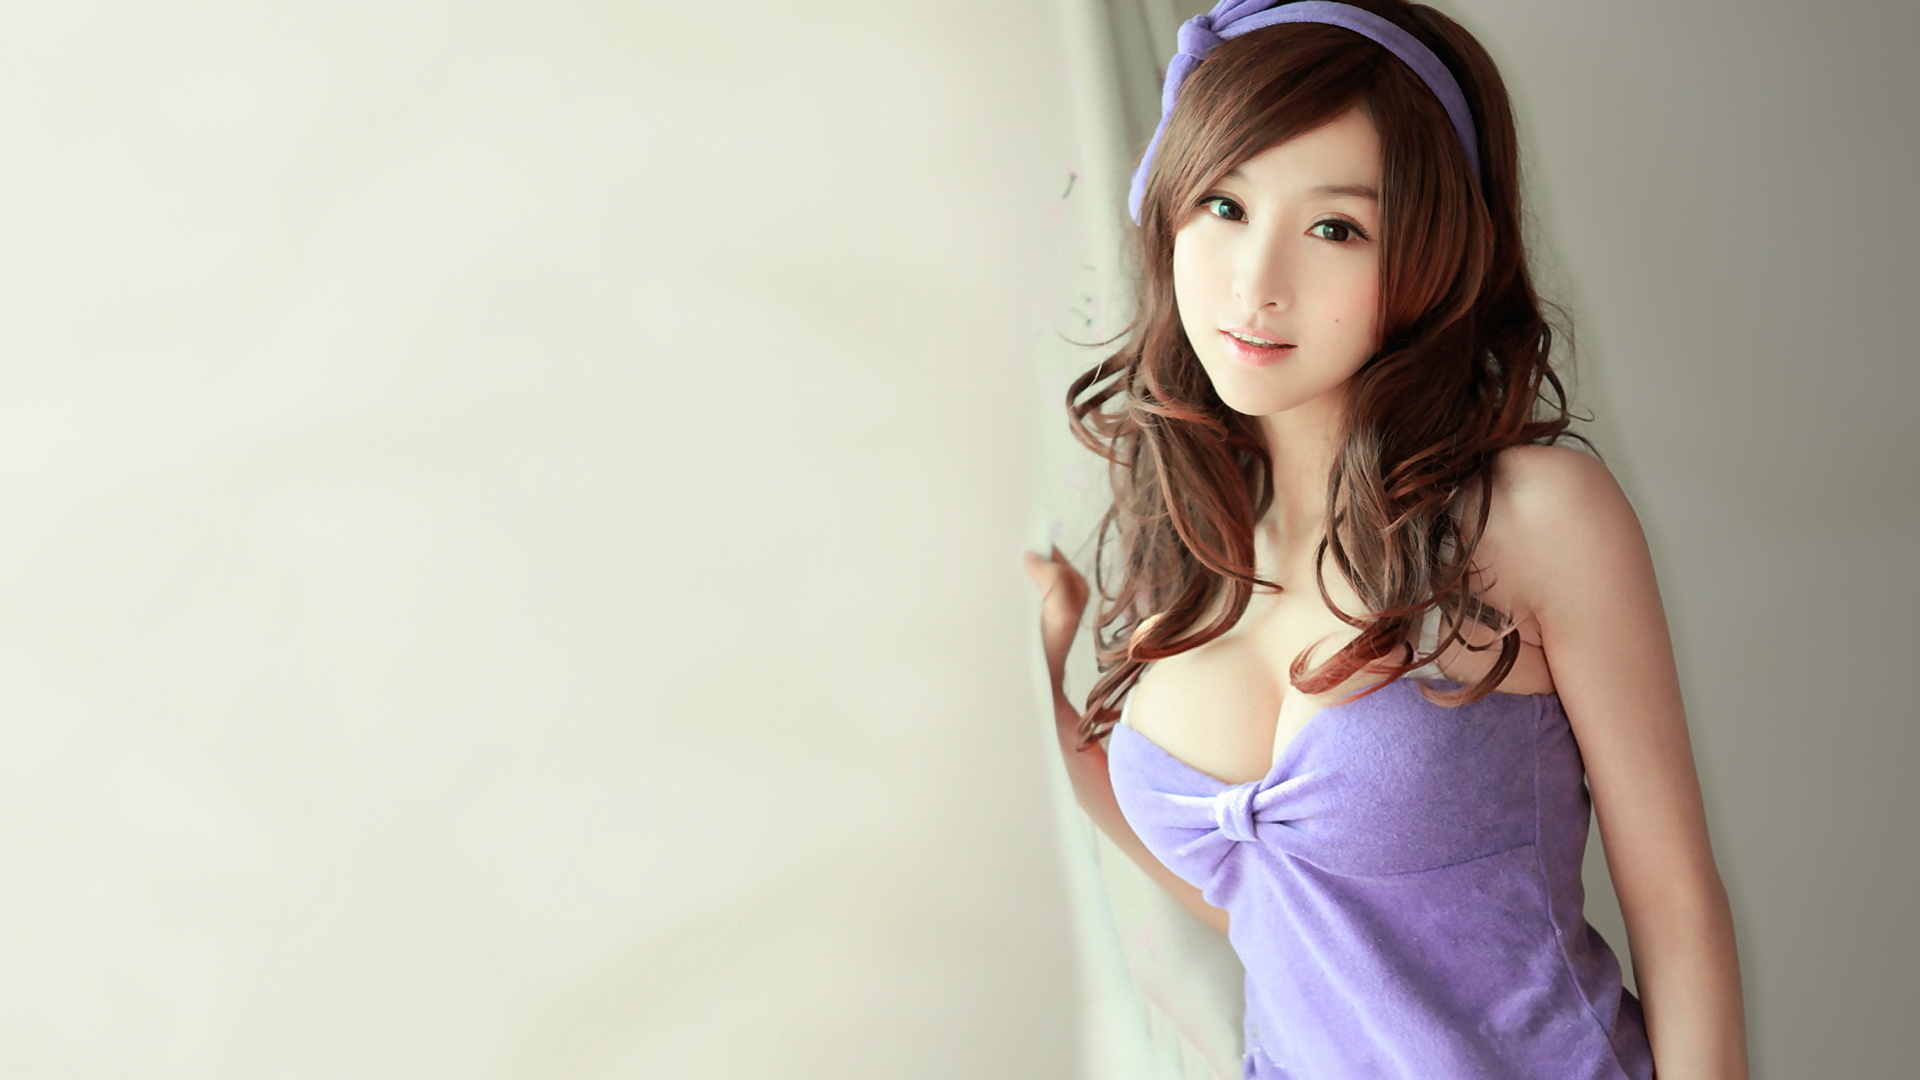 Download wallpaper chest, Japanese, Asian, section girls in resolution 1920...